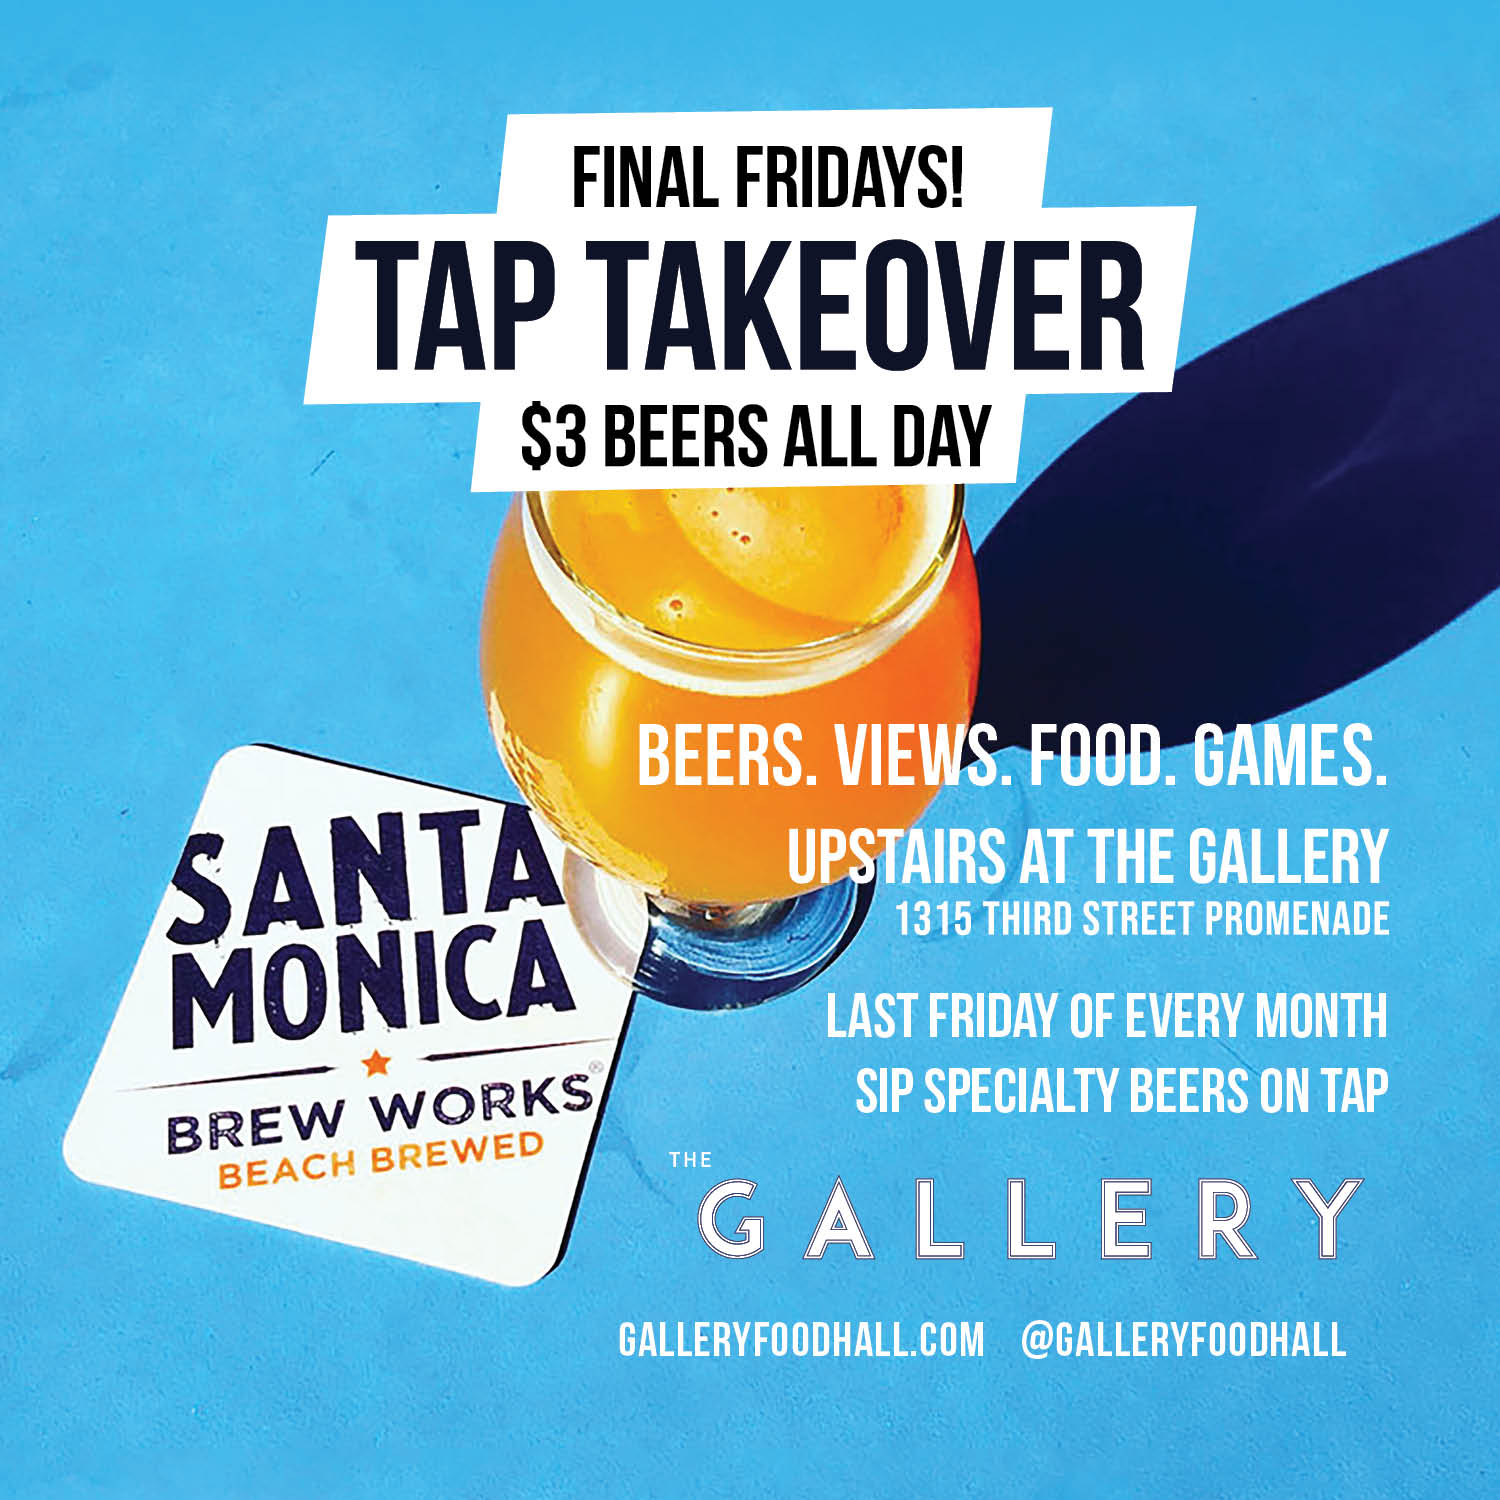 Tap Takeover on Final Fridays